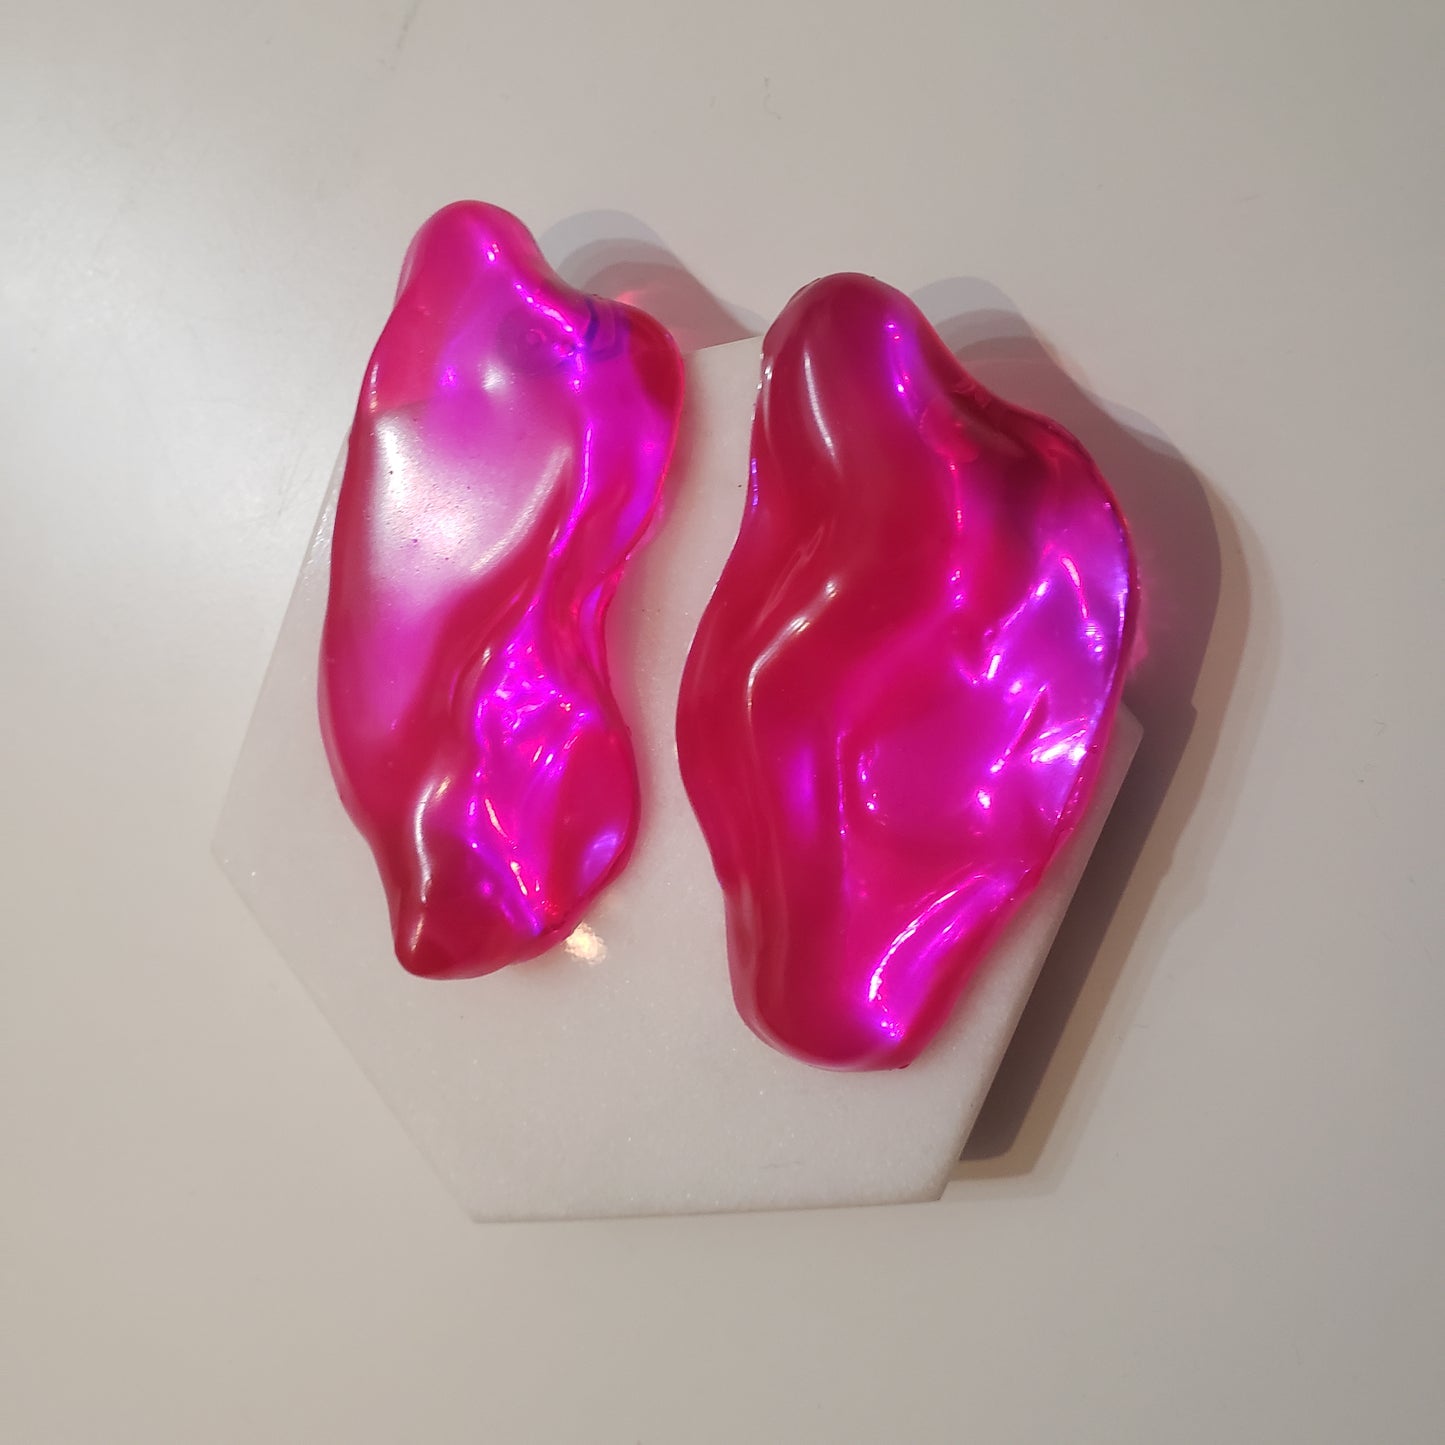 Asymmetrical Resin Earrings.  Lightweight.  Surgical Steel Post Backing. Dimensions: 1 ½ inch W x  2 ½ inches H.  Designed and handmade in Brooklyn, NY.